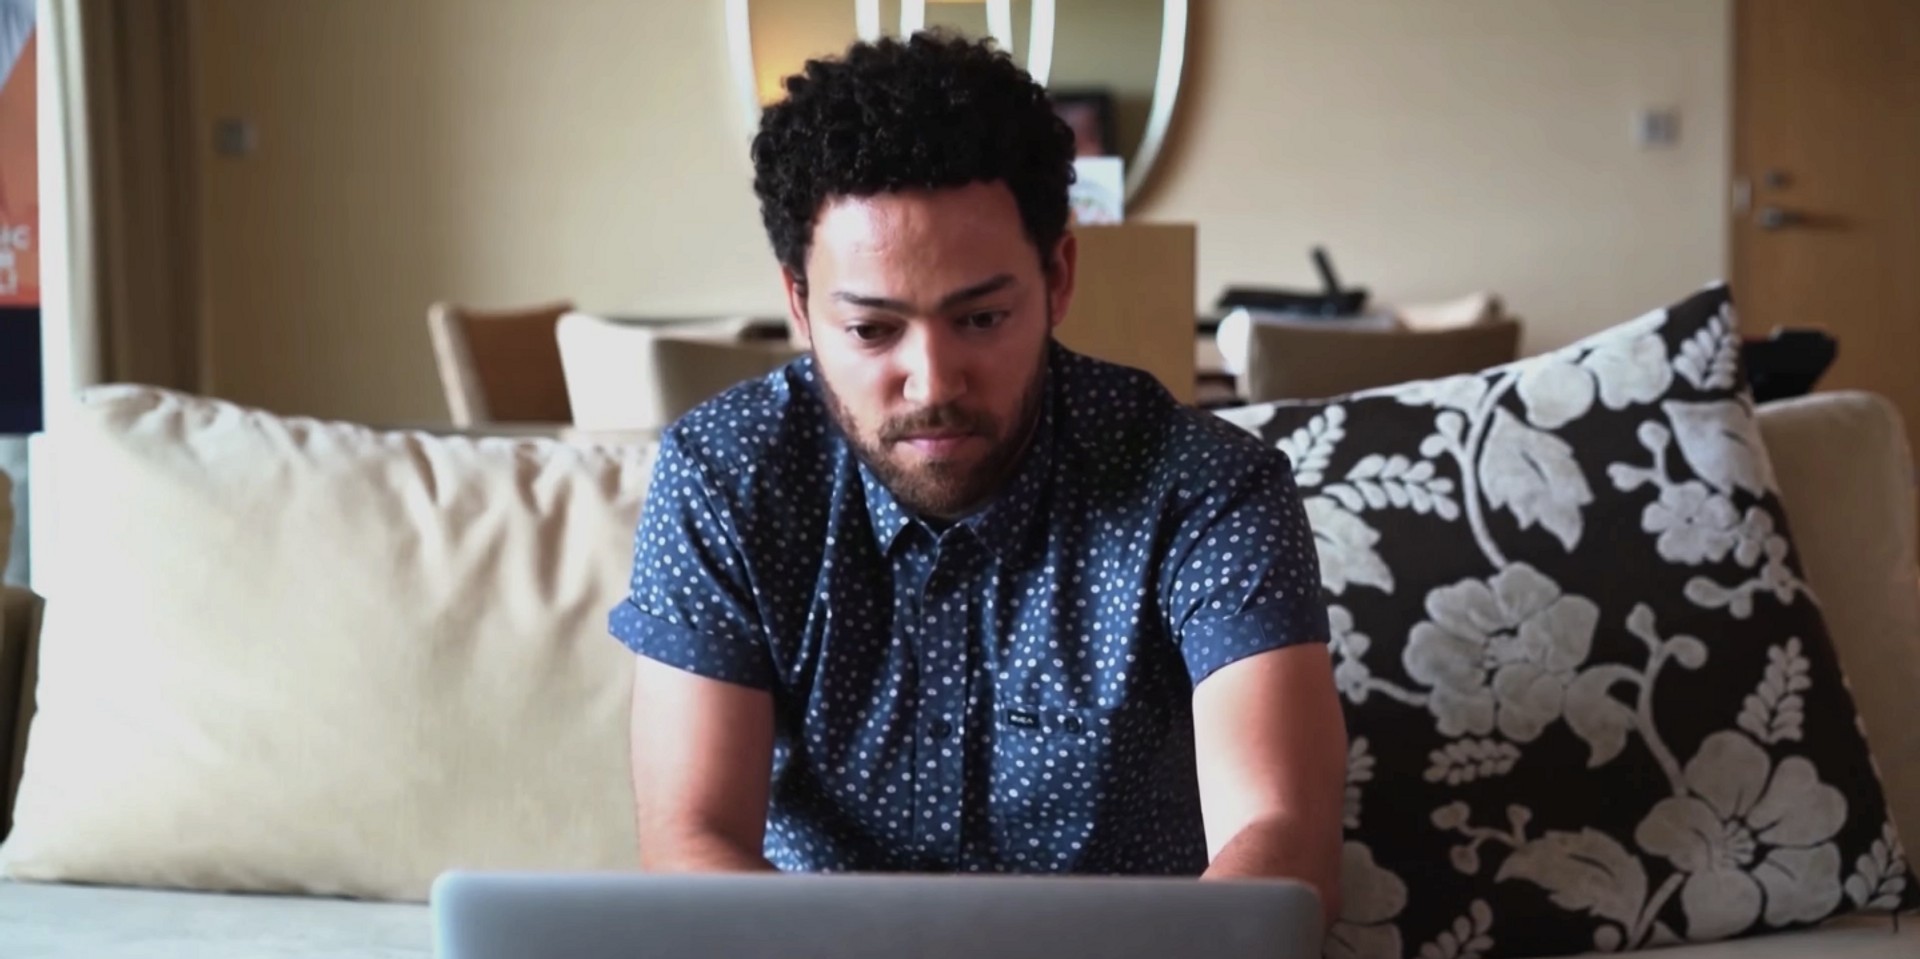 WATCH: Taylor McFerrin performs an improvised set in an MBS hotel suite